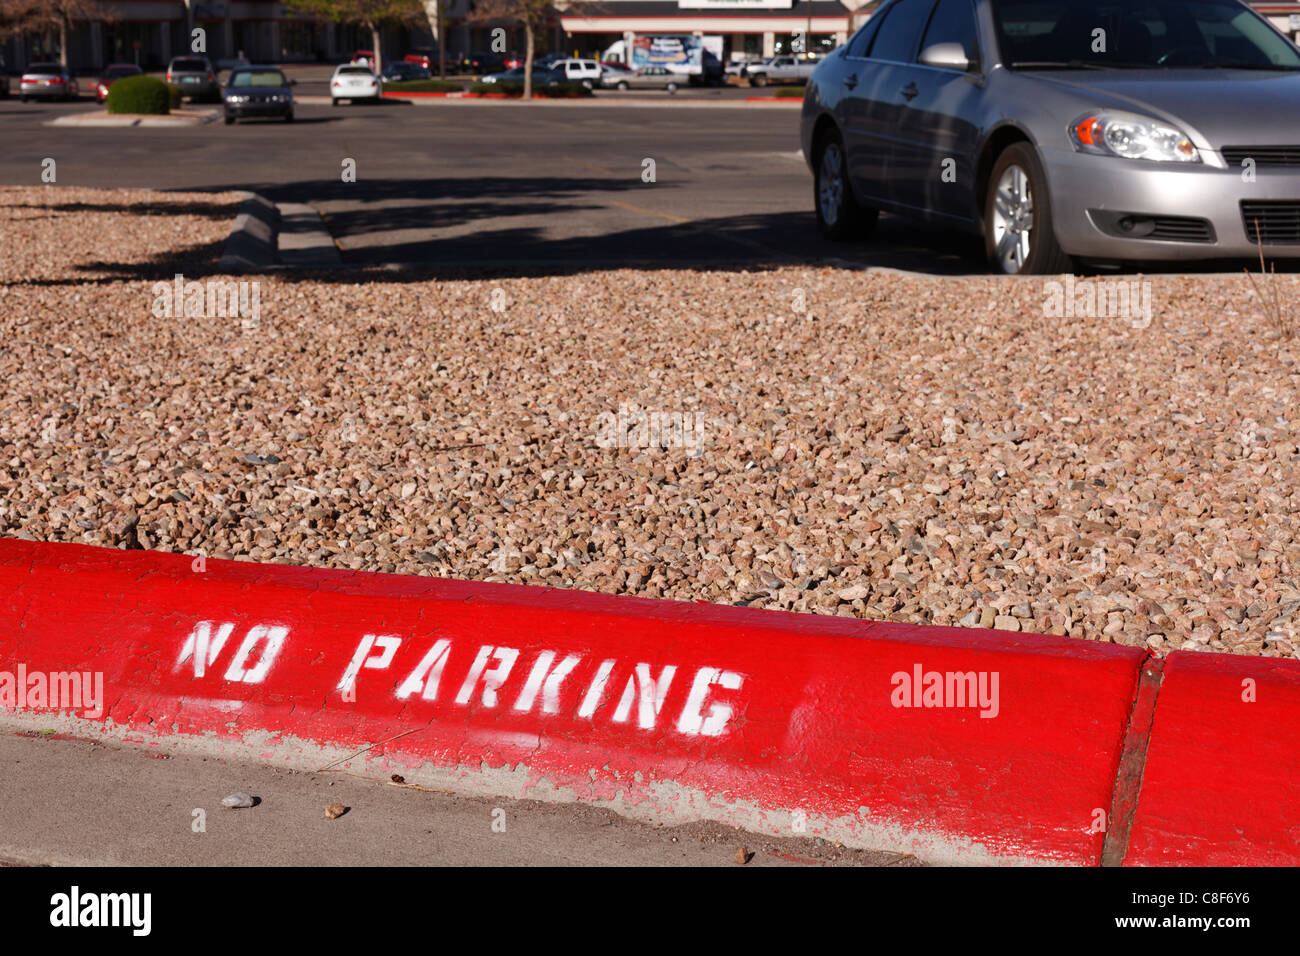 What are the rules regarding parking next to a street curb that is painted red?